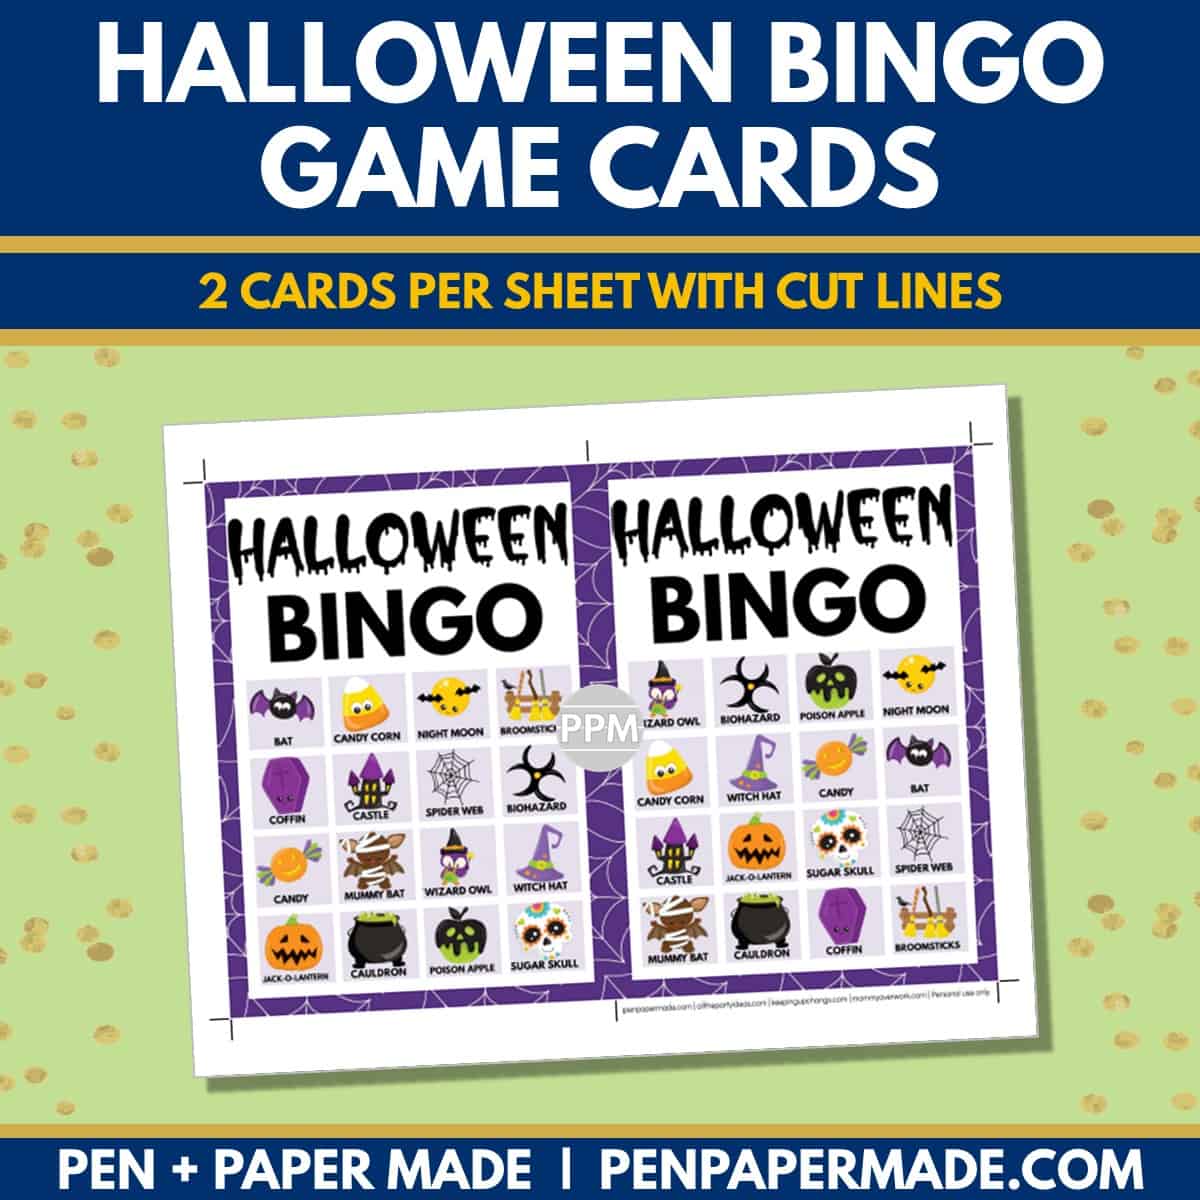 halloween bingo card 4x4 5x7 game boards with images and text words.